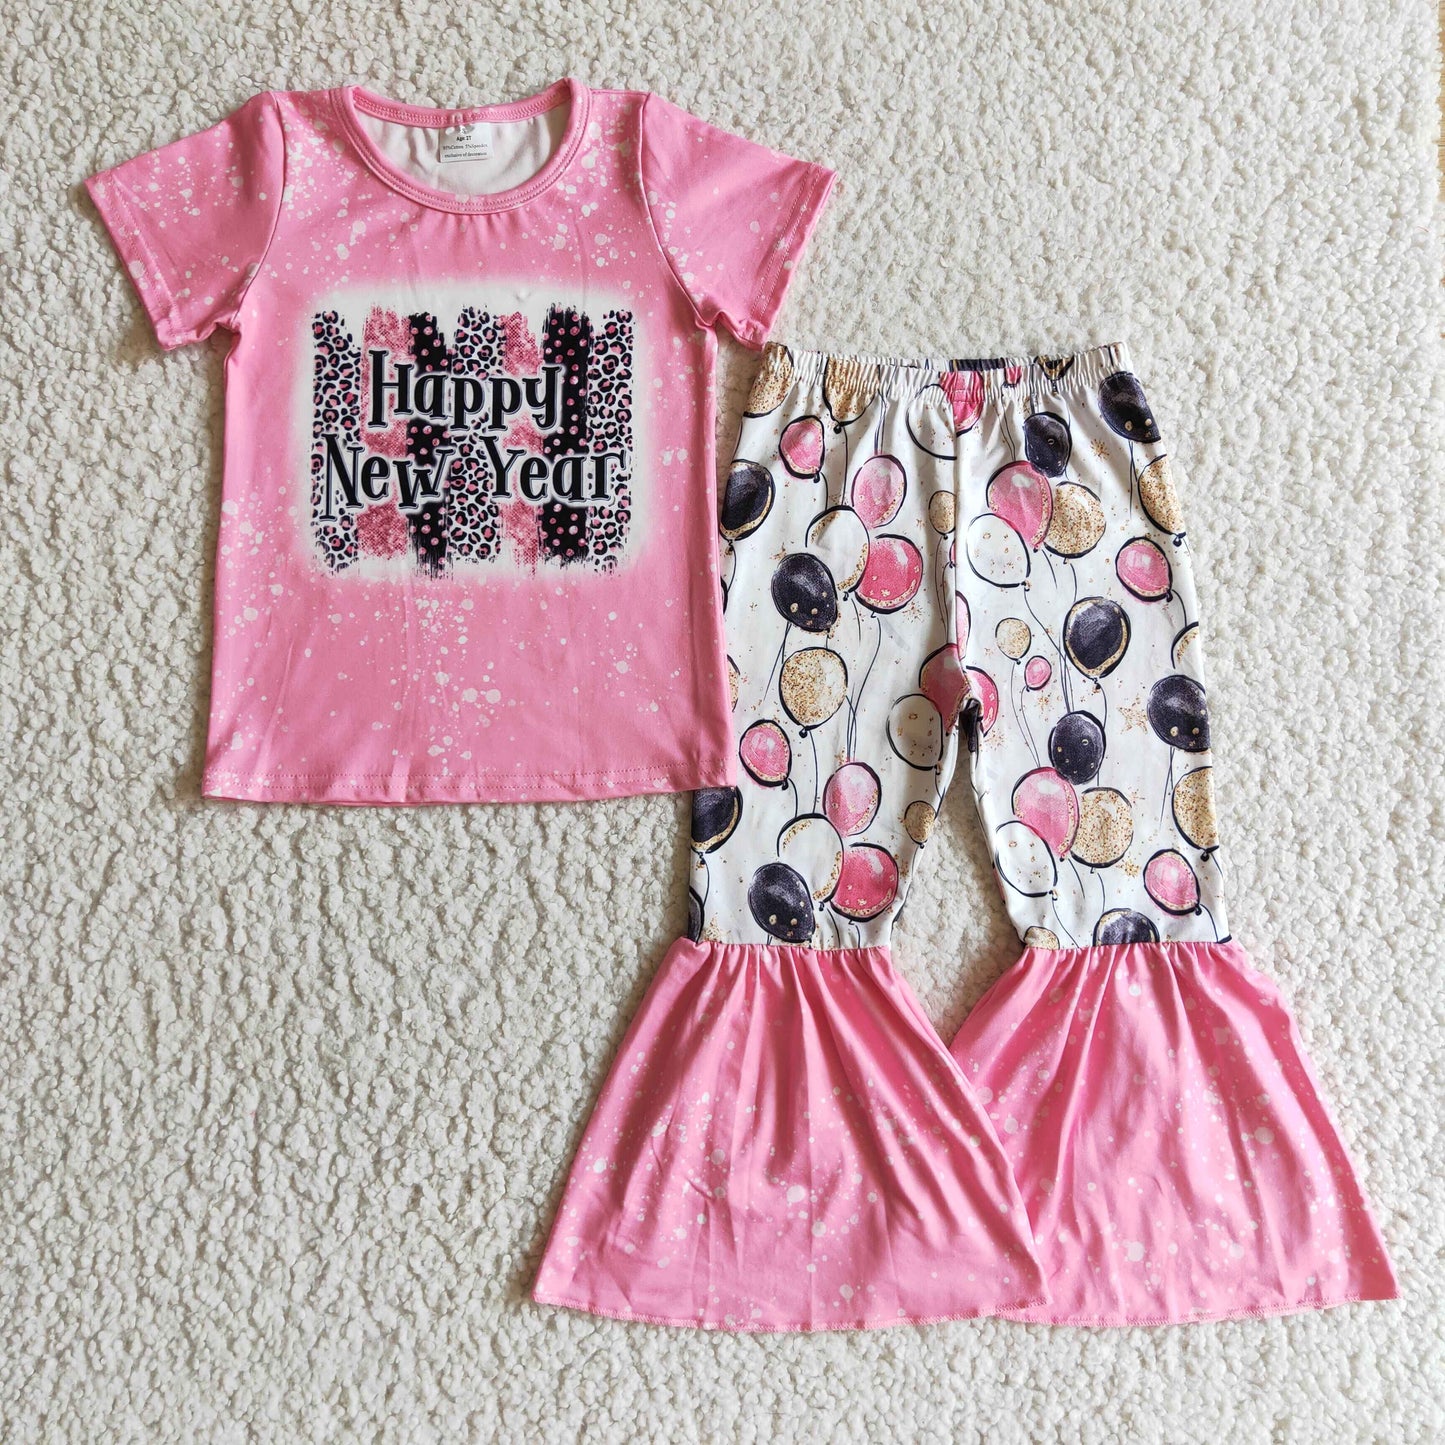 Girls Happy New Year outfits    GSPO0204